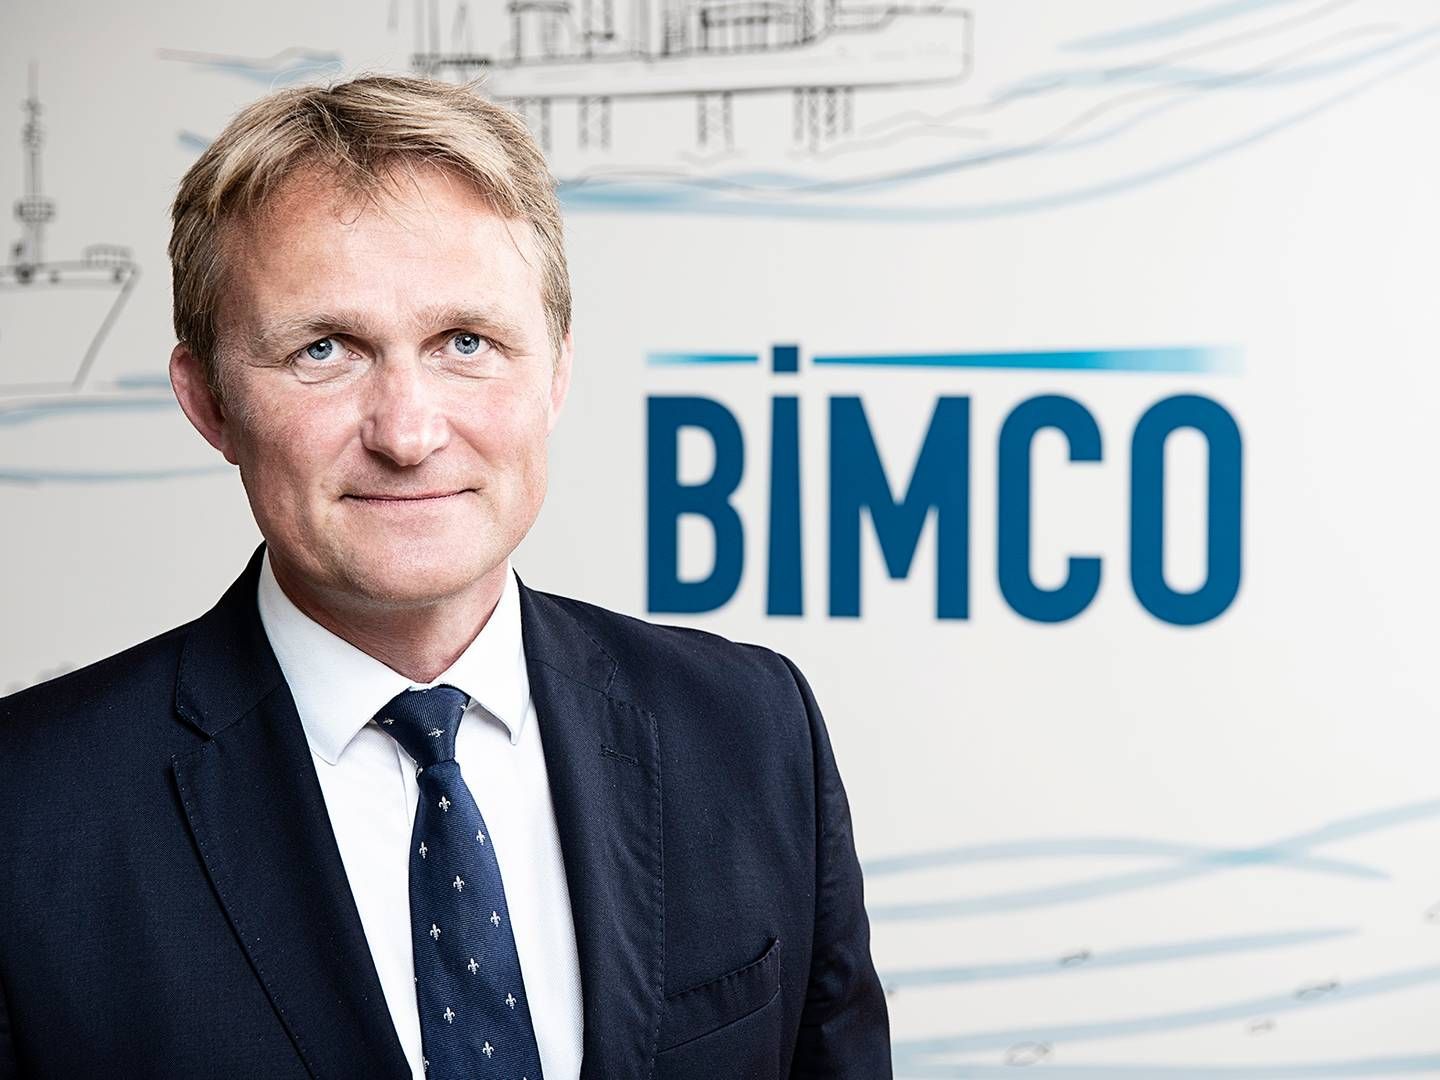 There are still legal gray areas that need to be clarified before the new Hong Kong Convention on ship recycling comes into force in 2025, writes David Loosley, secretary general and CEO of Bimco. | Photo: Pr / Bimco